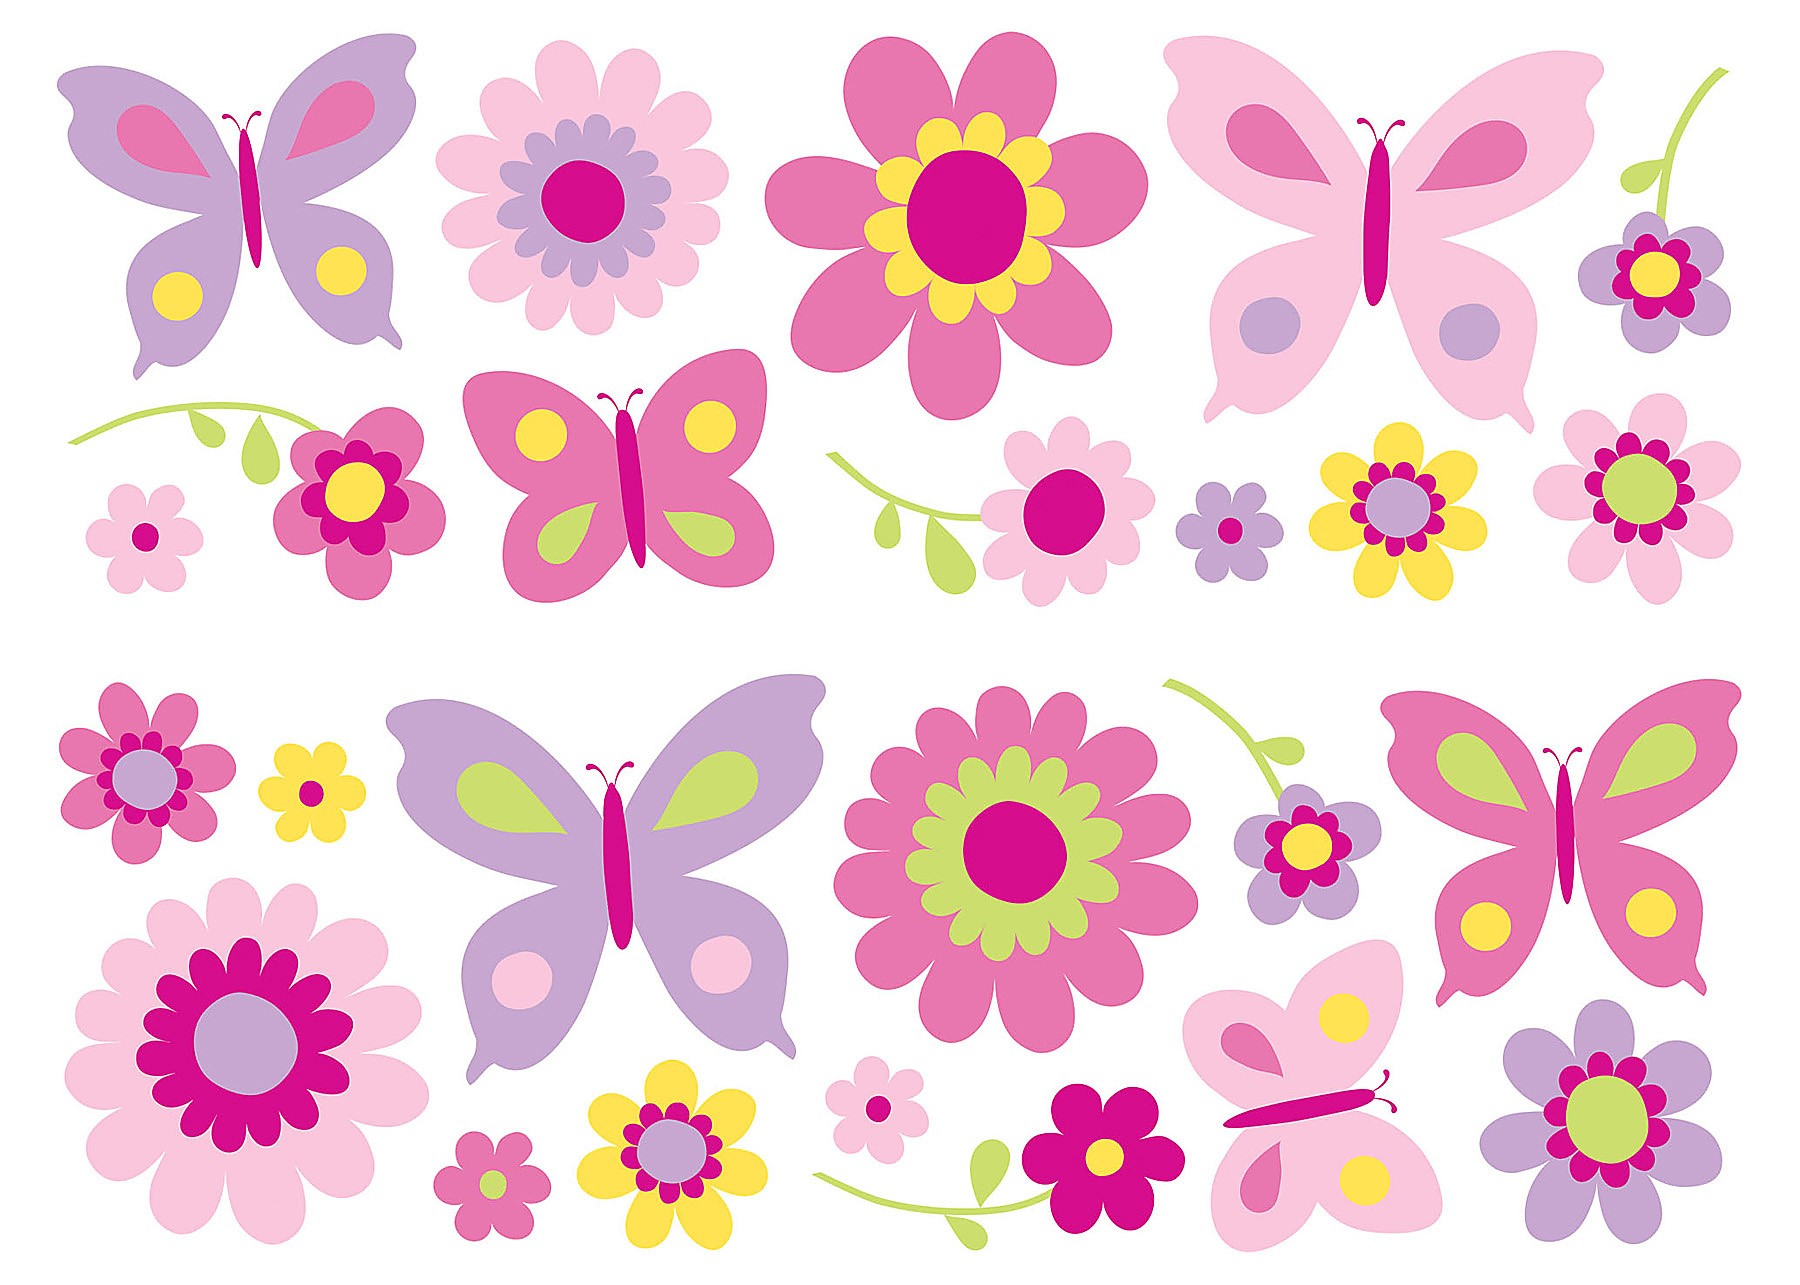 Fun4Walls Flowers and Butterflies Stikarounds - image 1 of 2